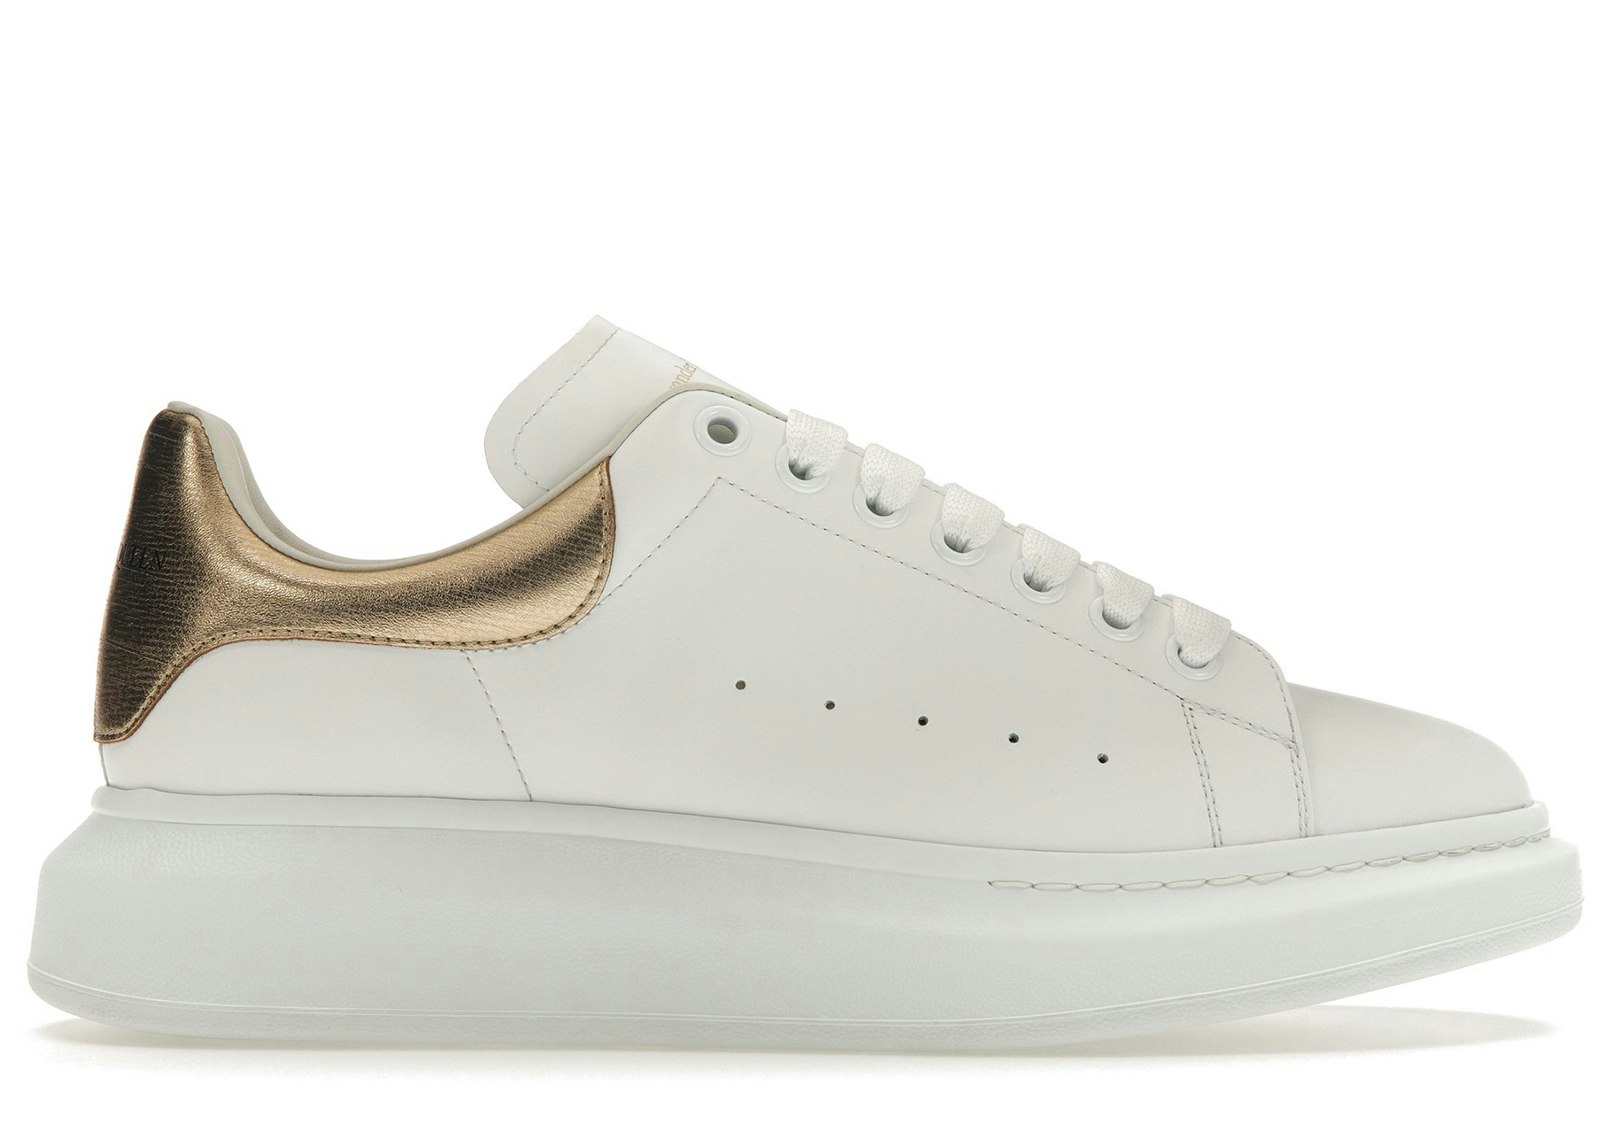 ALEXANDER MCQUEEN White and Gold Oversized Sneakers Sz 38 - ShopperBoard